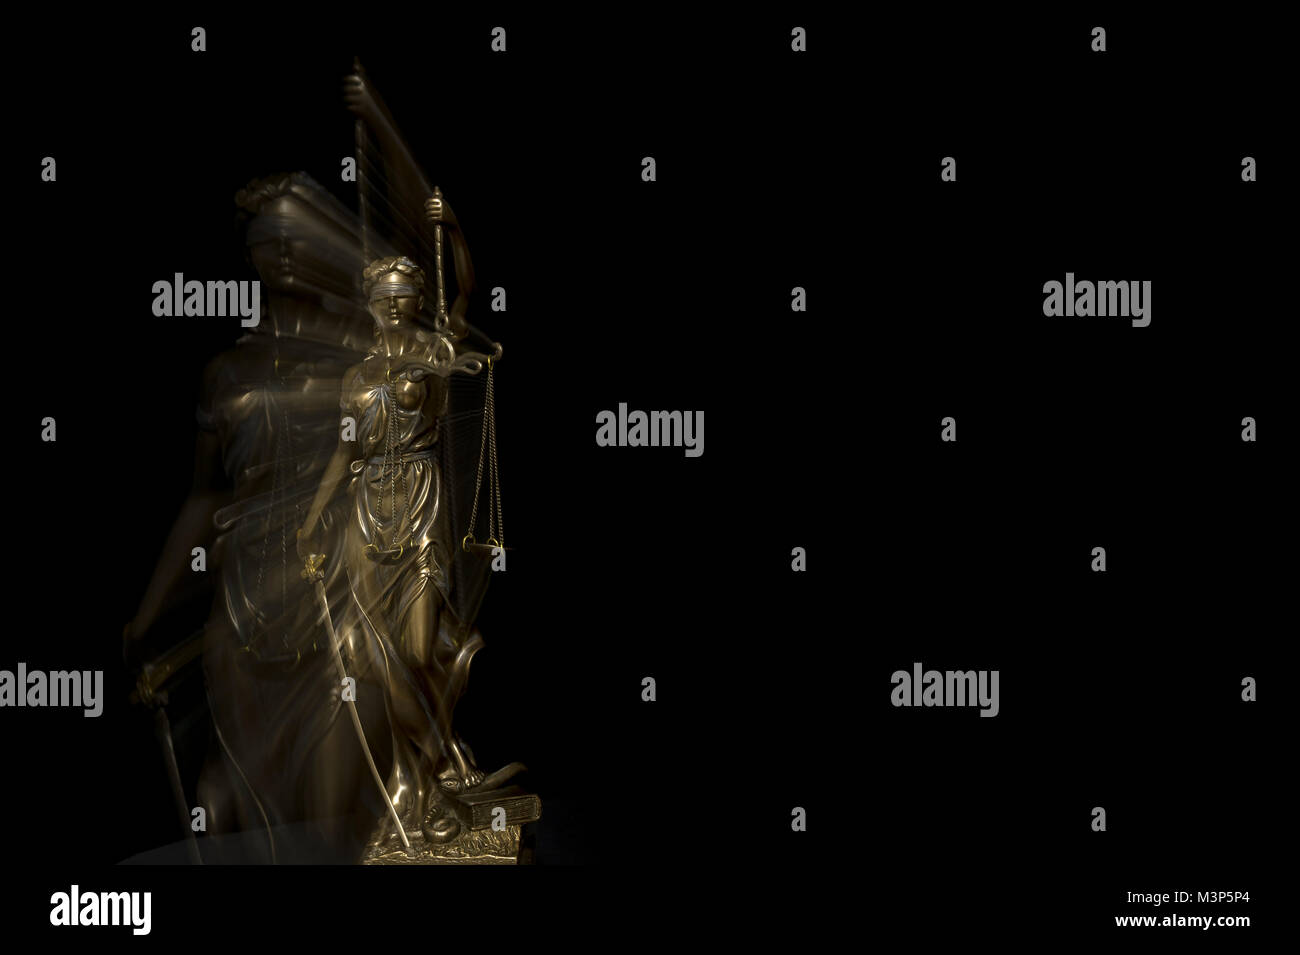 Unclear legal situation - Justitia statue in blurred zoom effect in front of black background Stock Photo